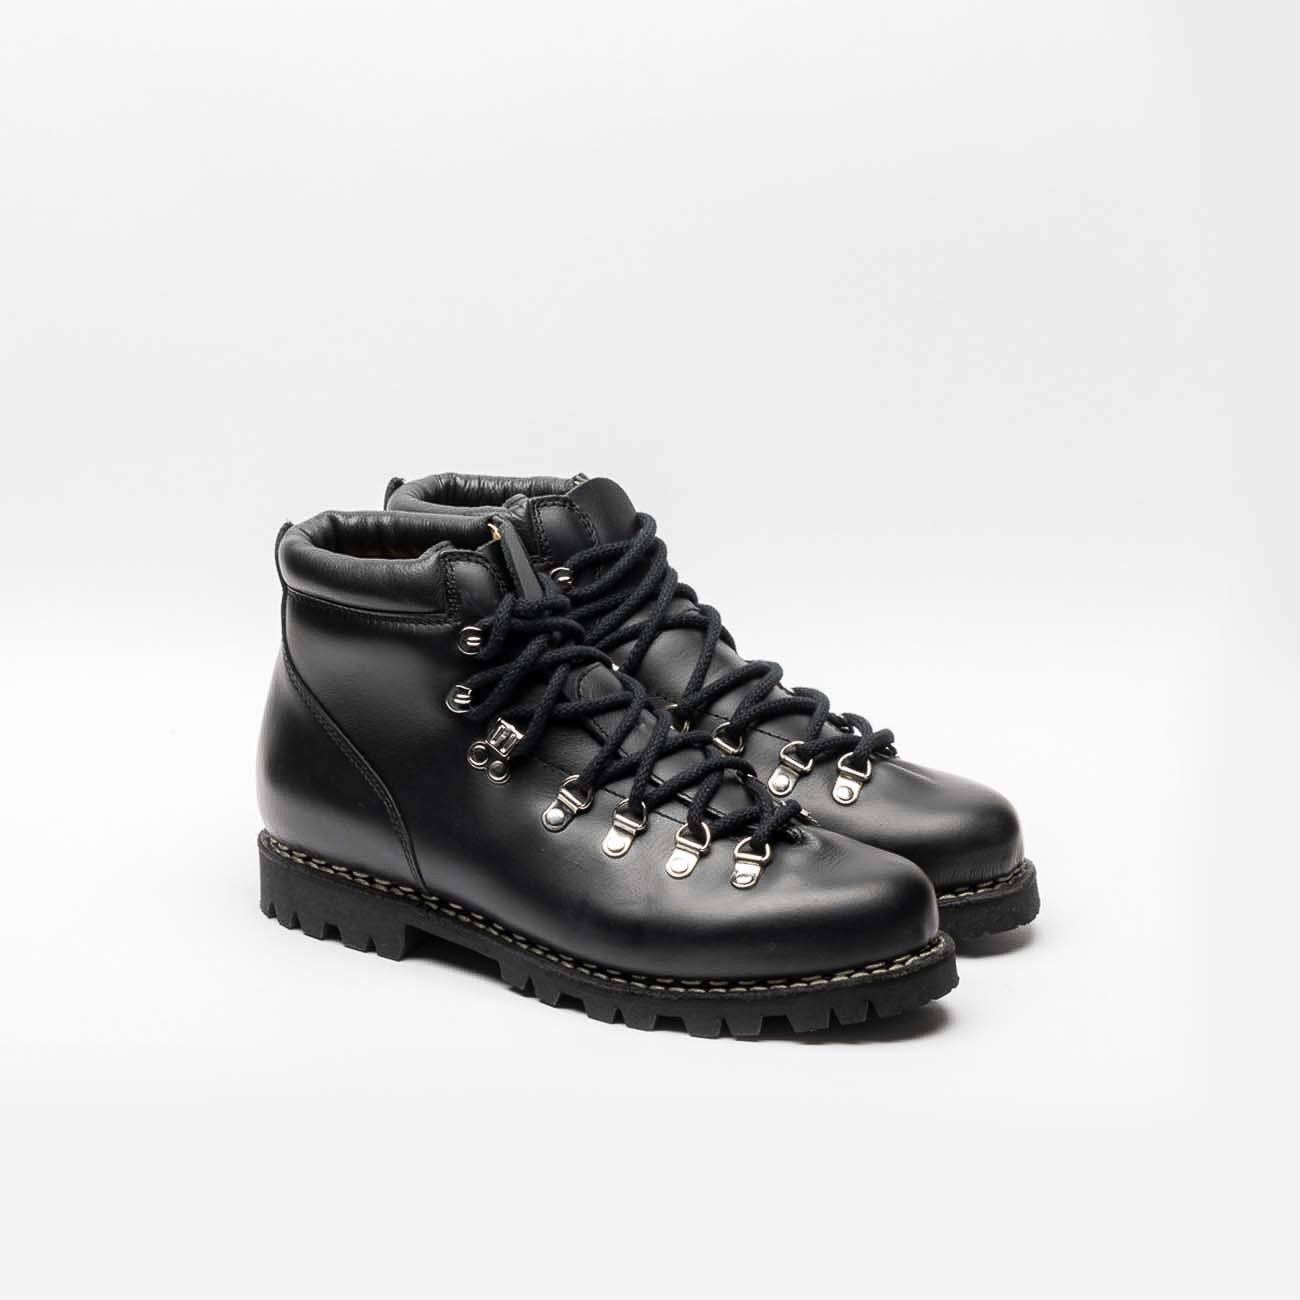 Galibier Paraboot Avoriaz ankle boot in black leather